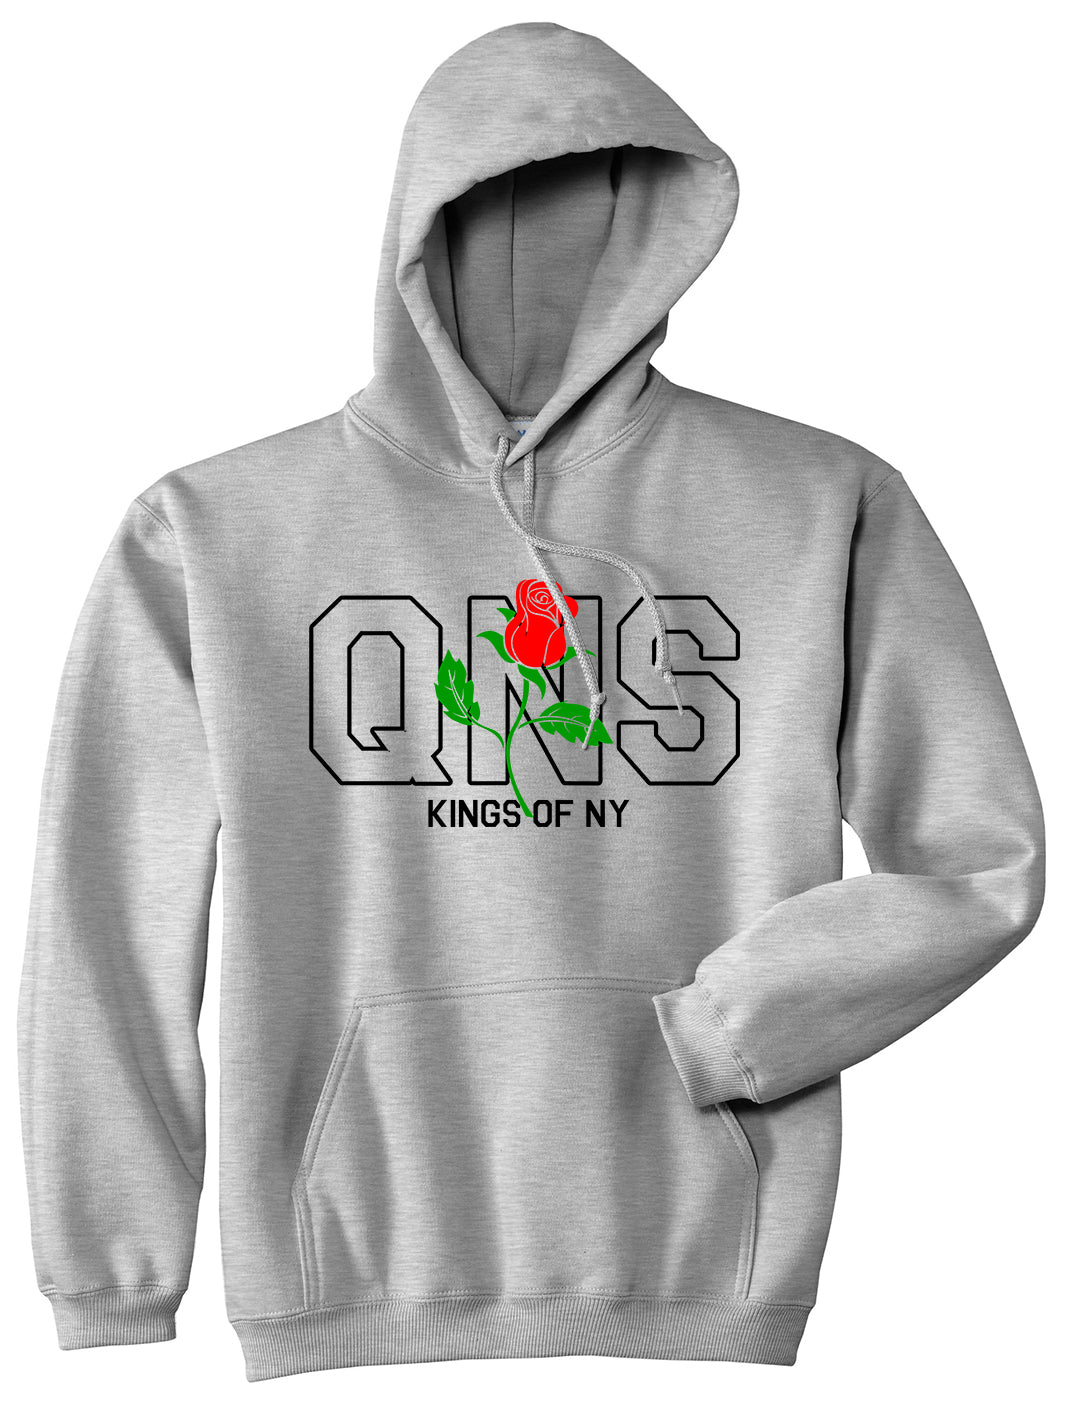 Rose QNS Queens Kings Of NY Mens Pullover Hoodie Grey